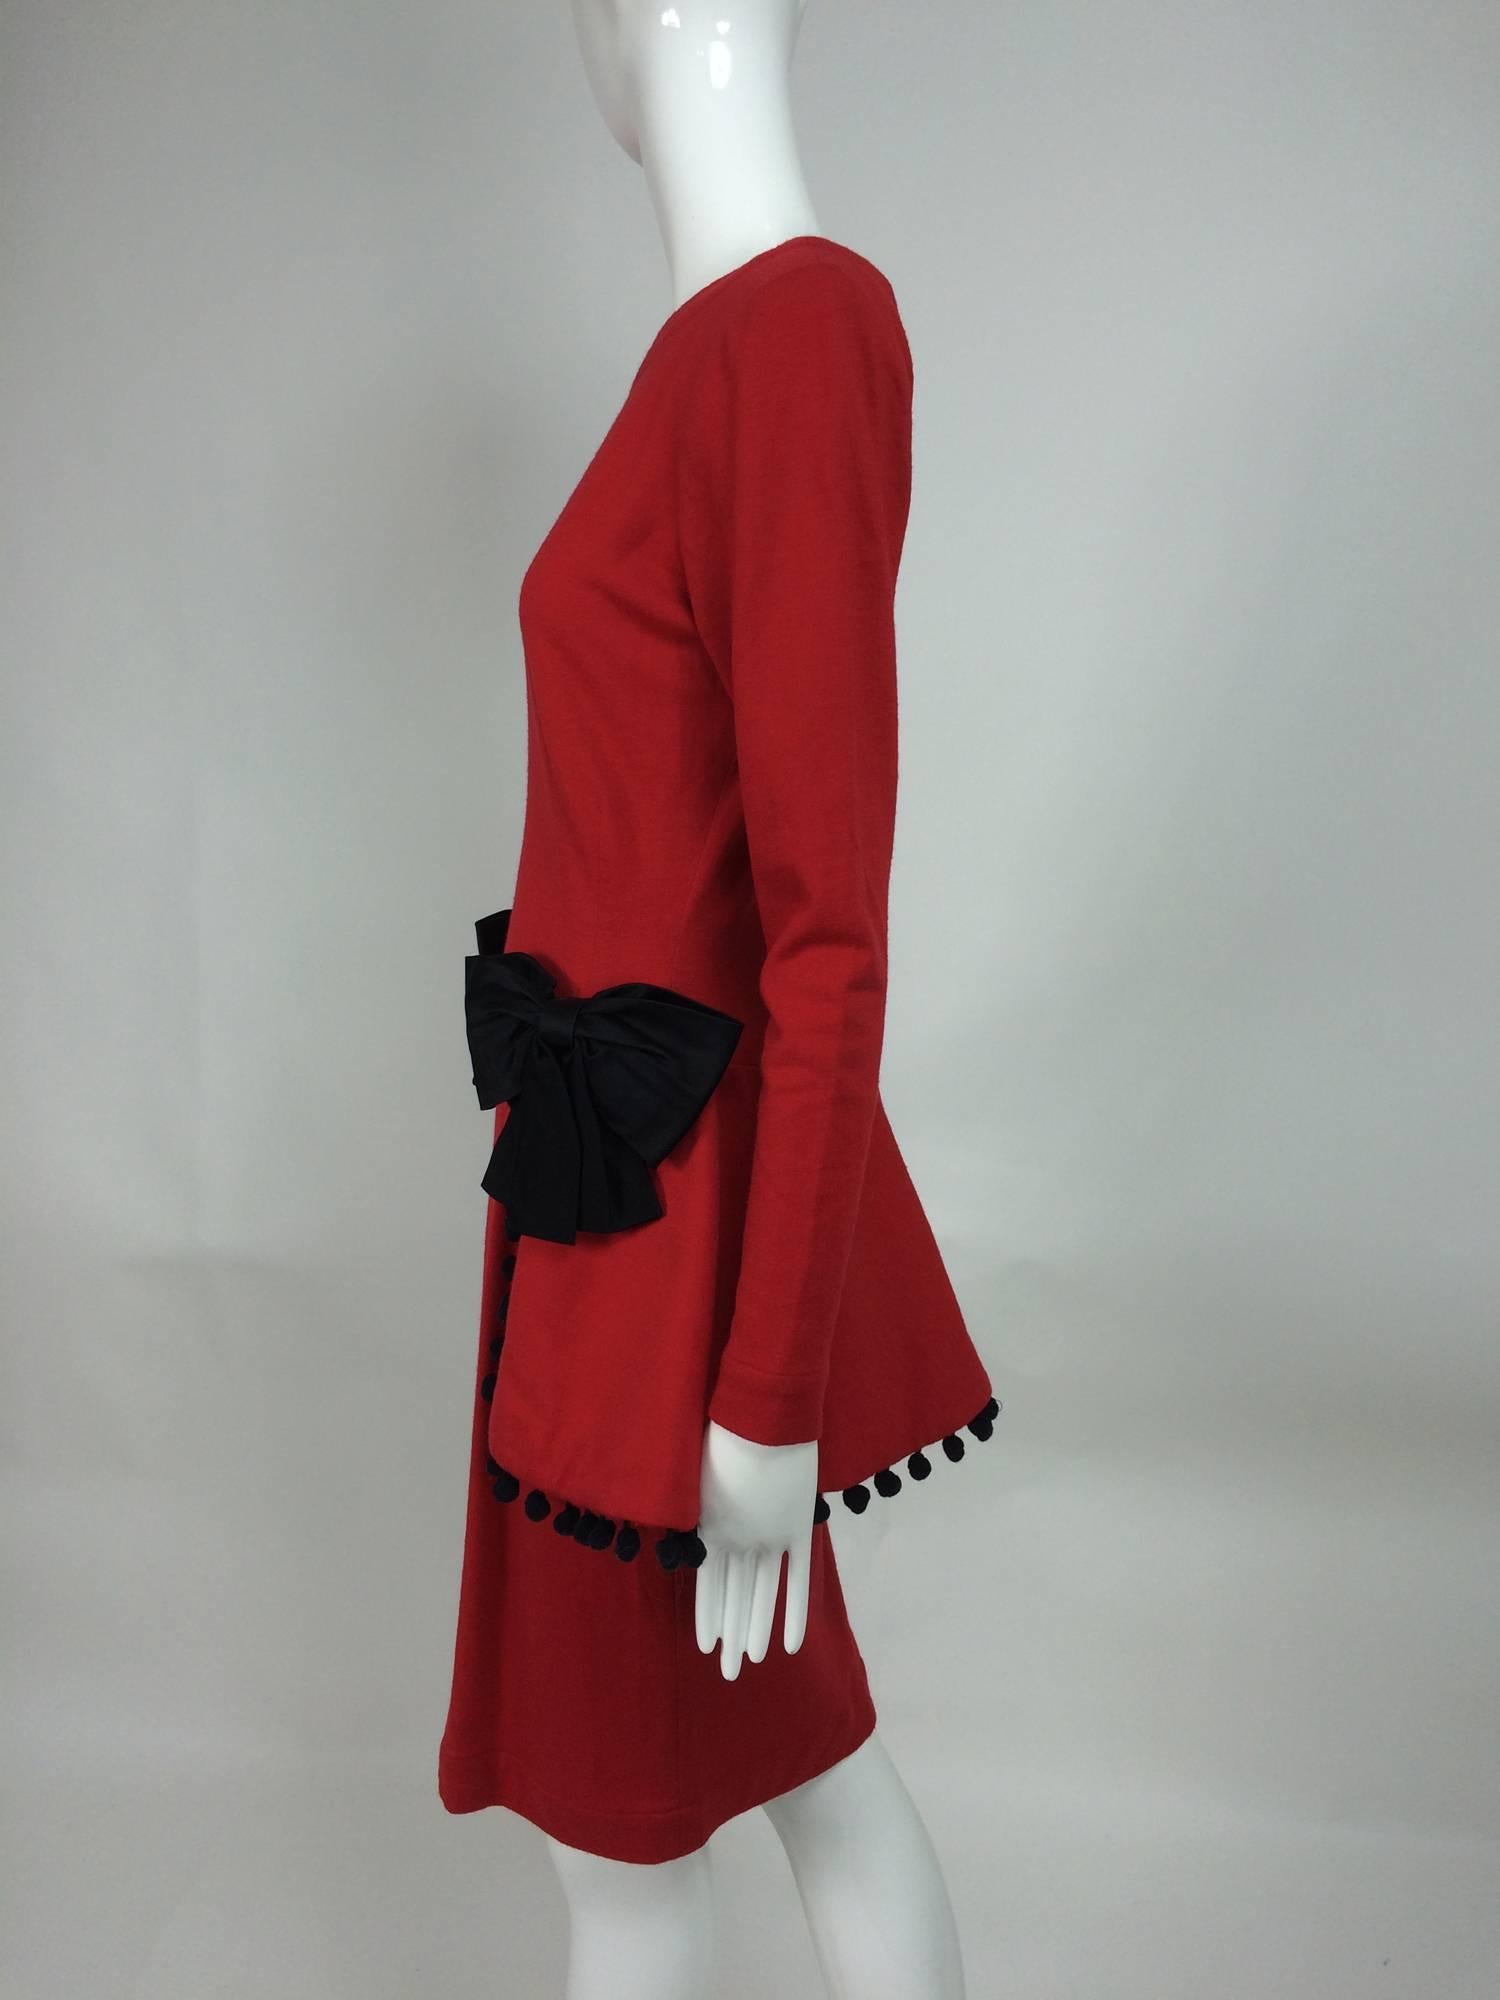 Isabelle Allard Paris red jersey dress with peplum hip bows & pom poms 1990s...Fine red wool jersey dress with darted waist and a banded jewel neckline...Long tapered sleeves...Peplum waist (actually sits just below the natural waist line) with